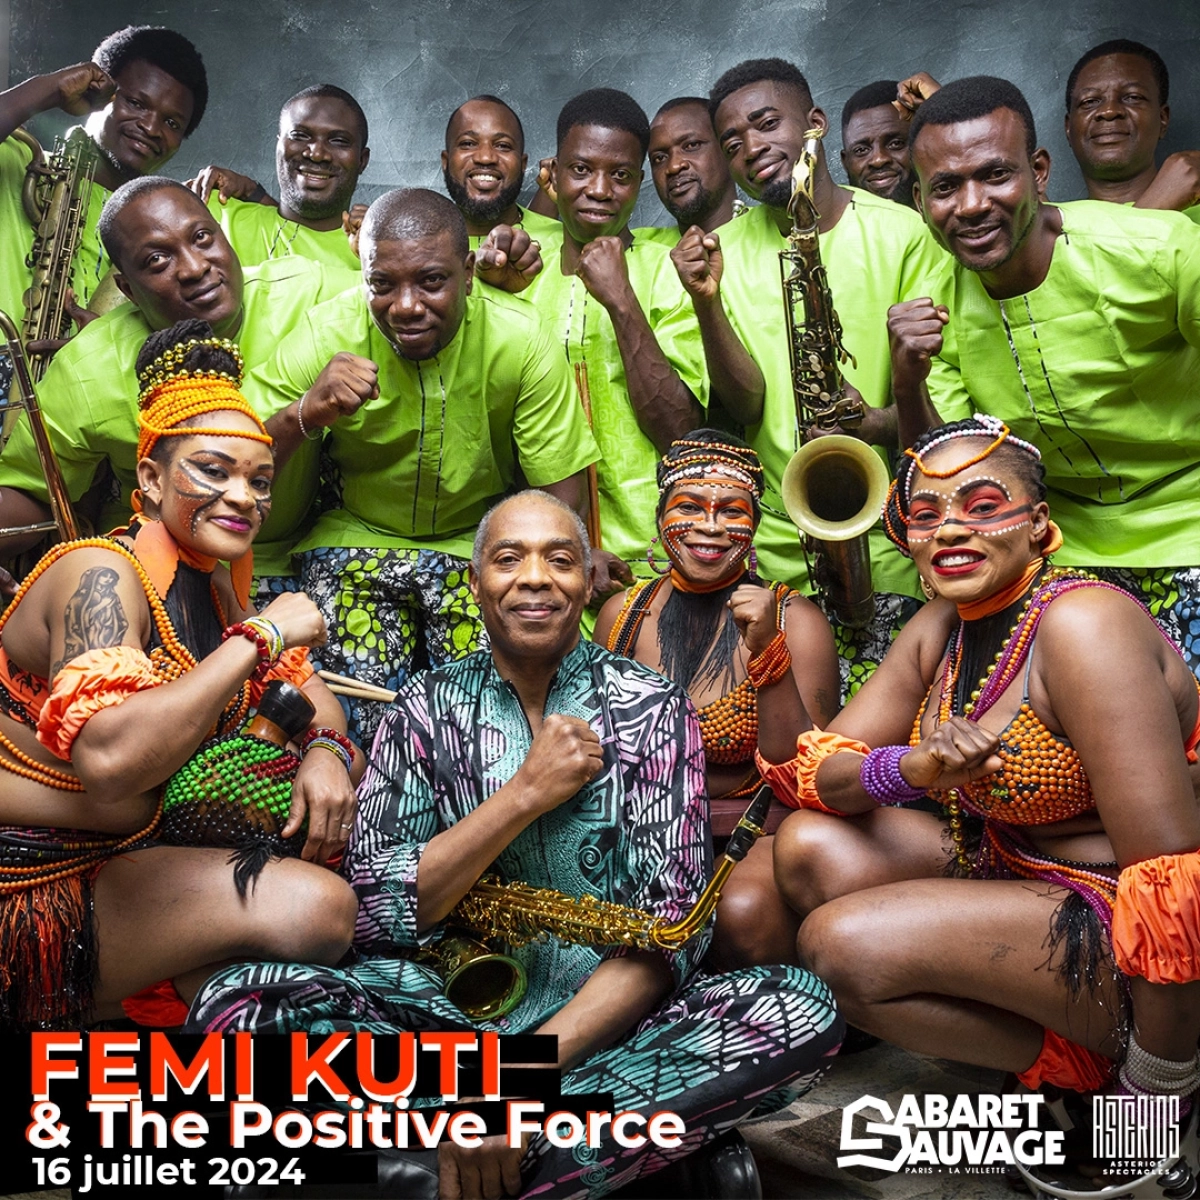 Femi Kuti and The Positive Force en Cabaret Sauvage Tickets